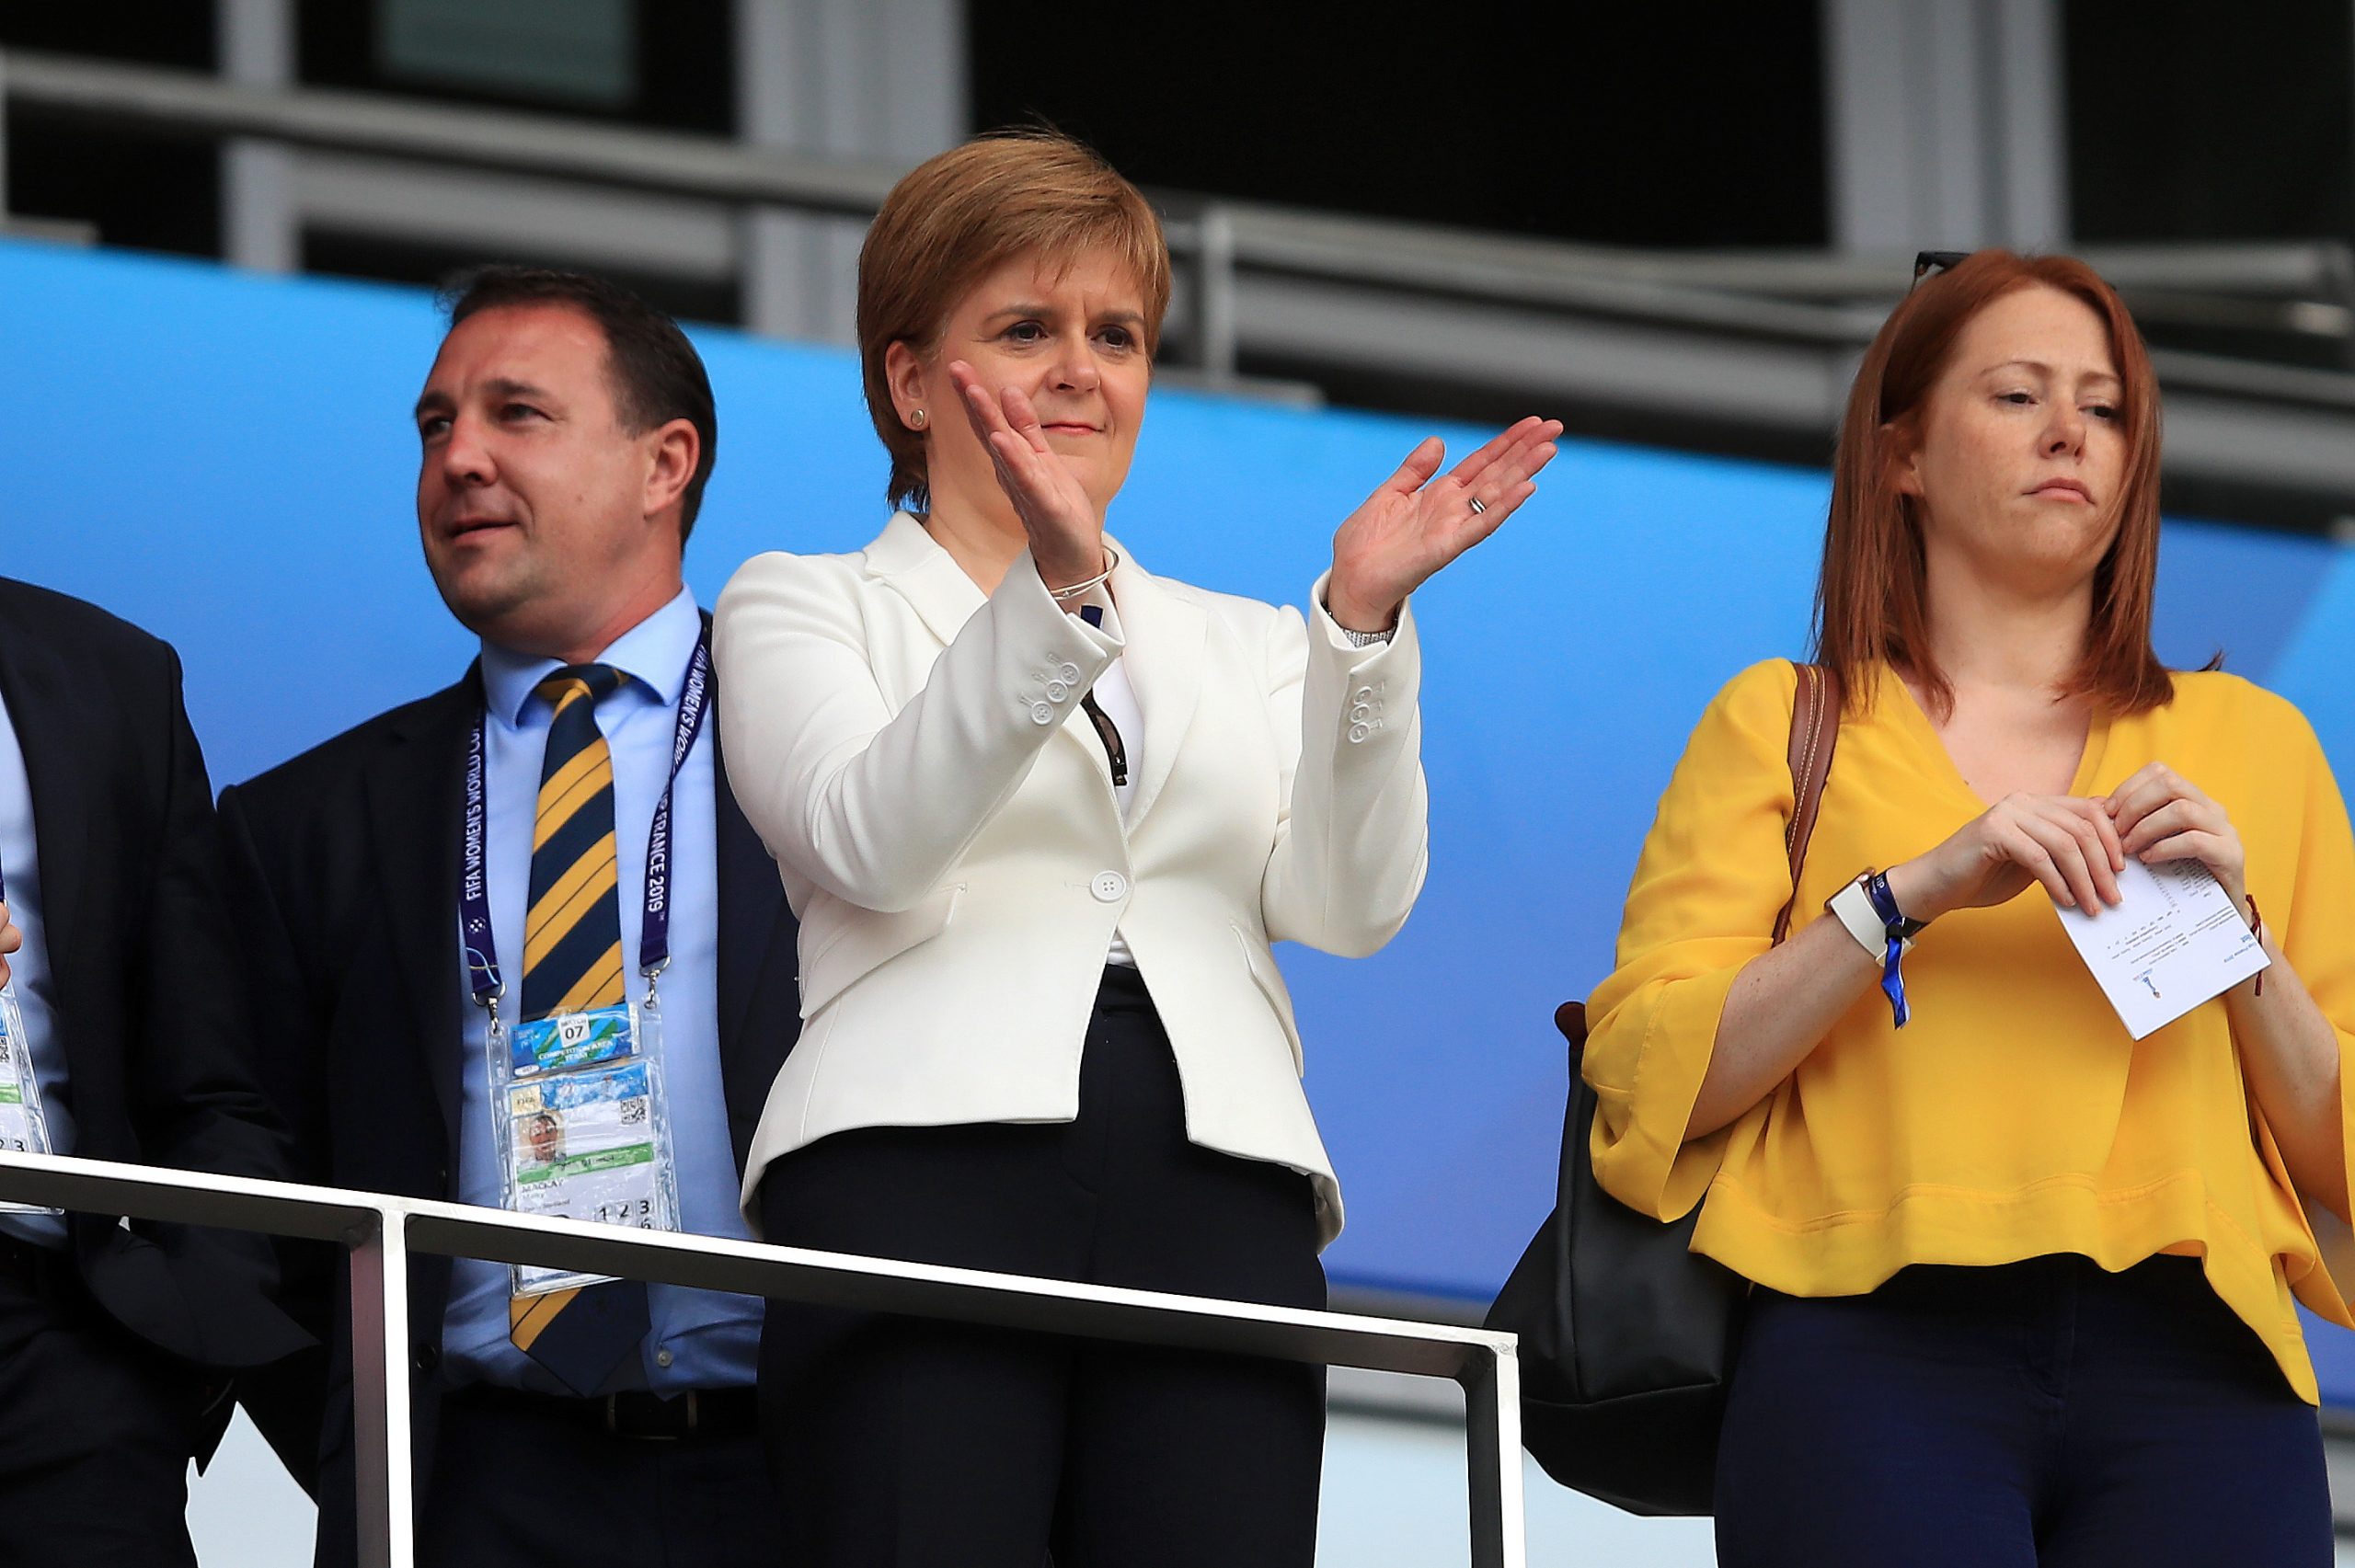 NICE, FRANCE - JUNE 09: Nicola Sturgeon, First Minister of Scotland looks on from the stands prior to the 2019 FIFA Women's World Cup France group D match between England and Scotland at Stade de Nice on June 09, 2019 in Nice, France.